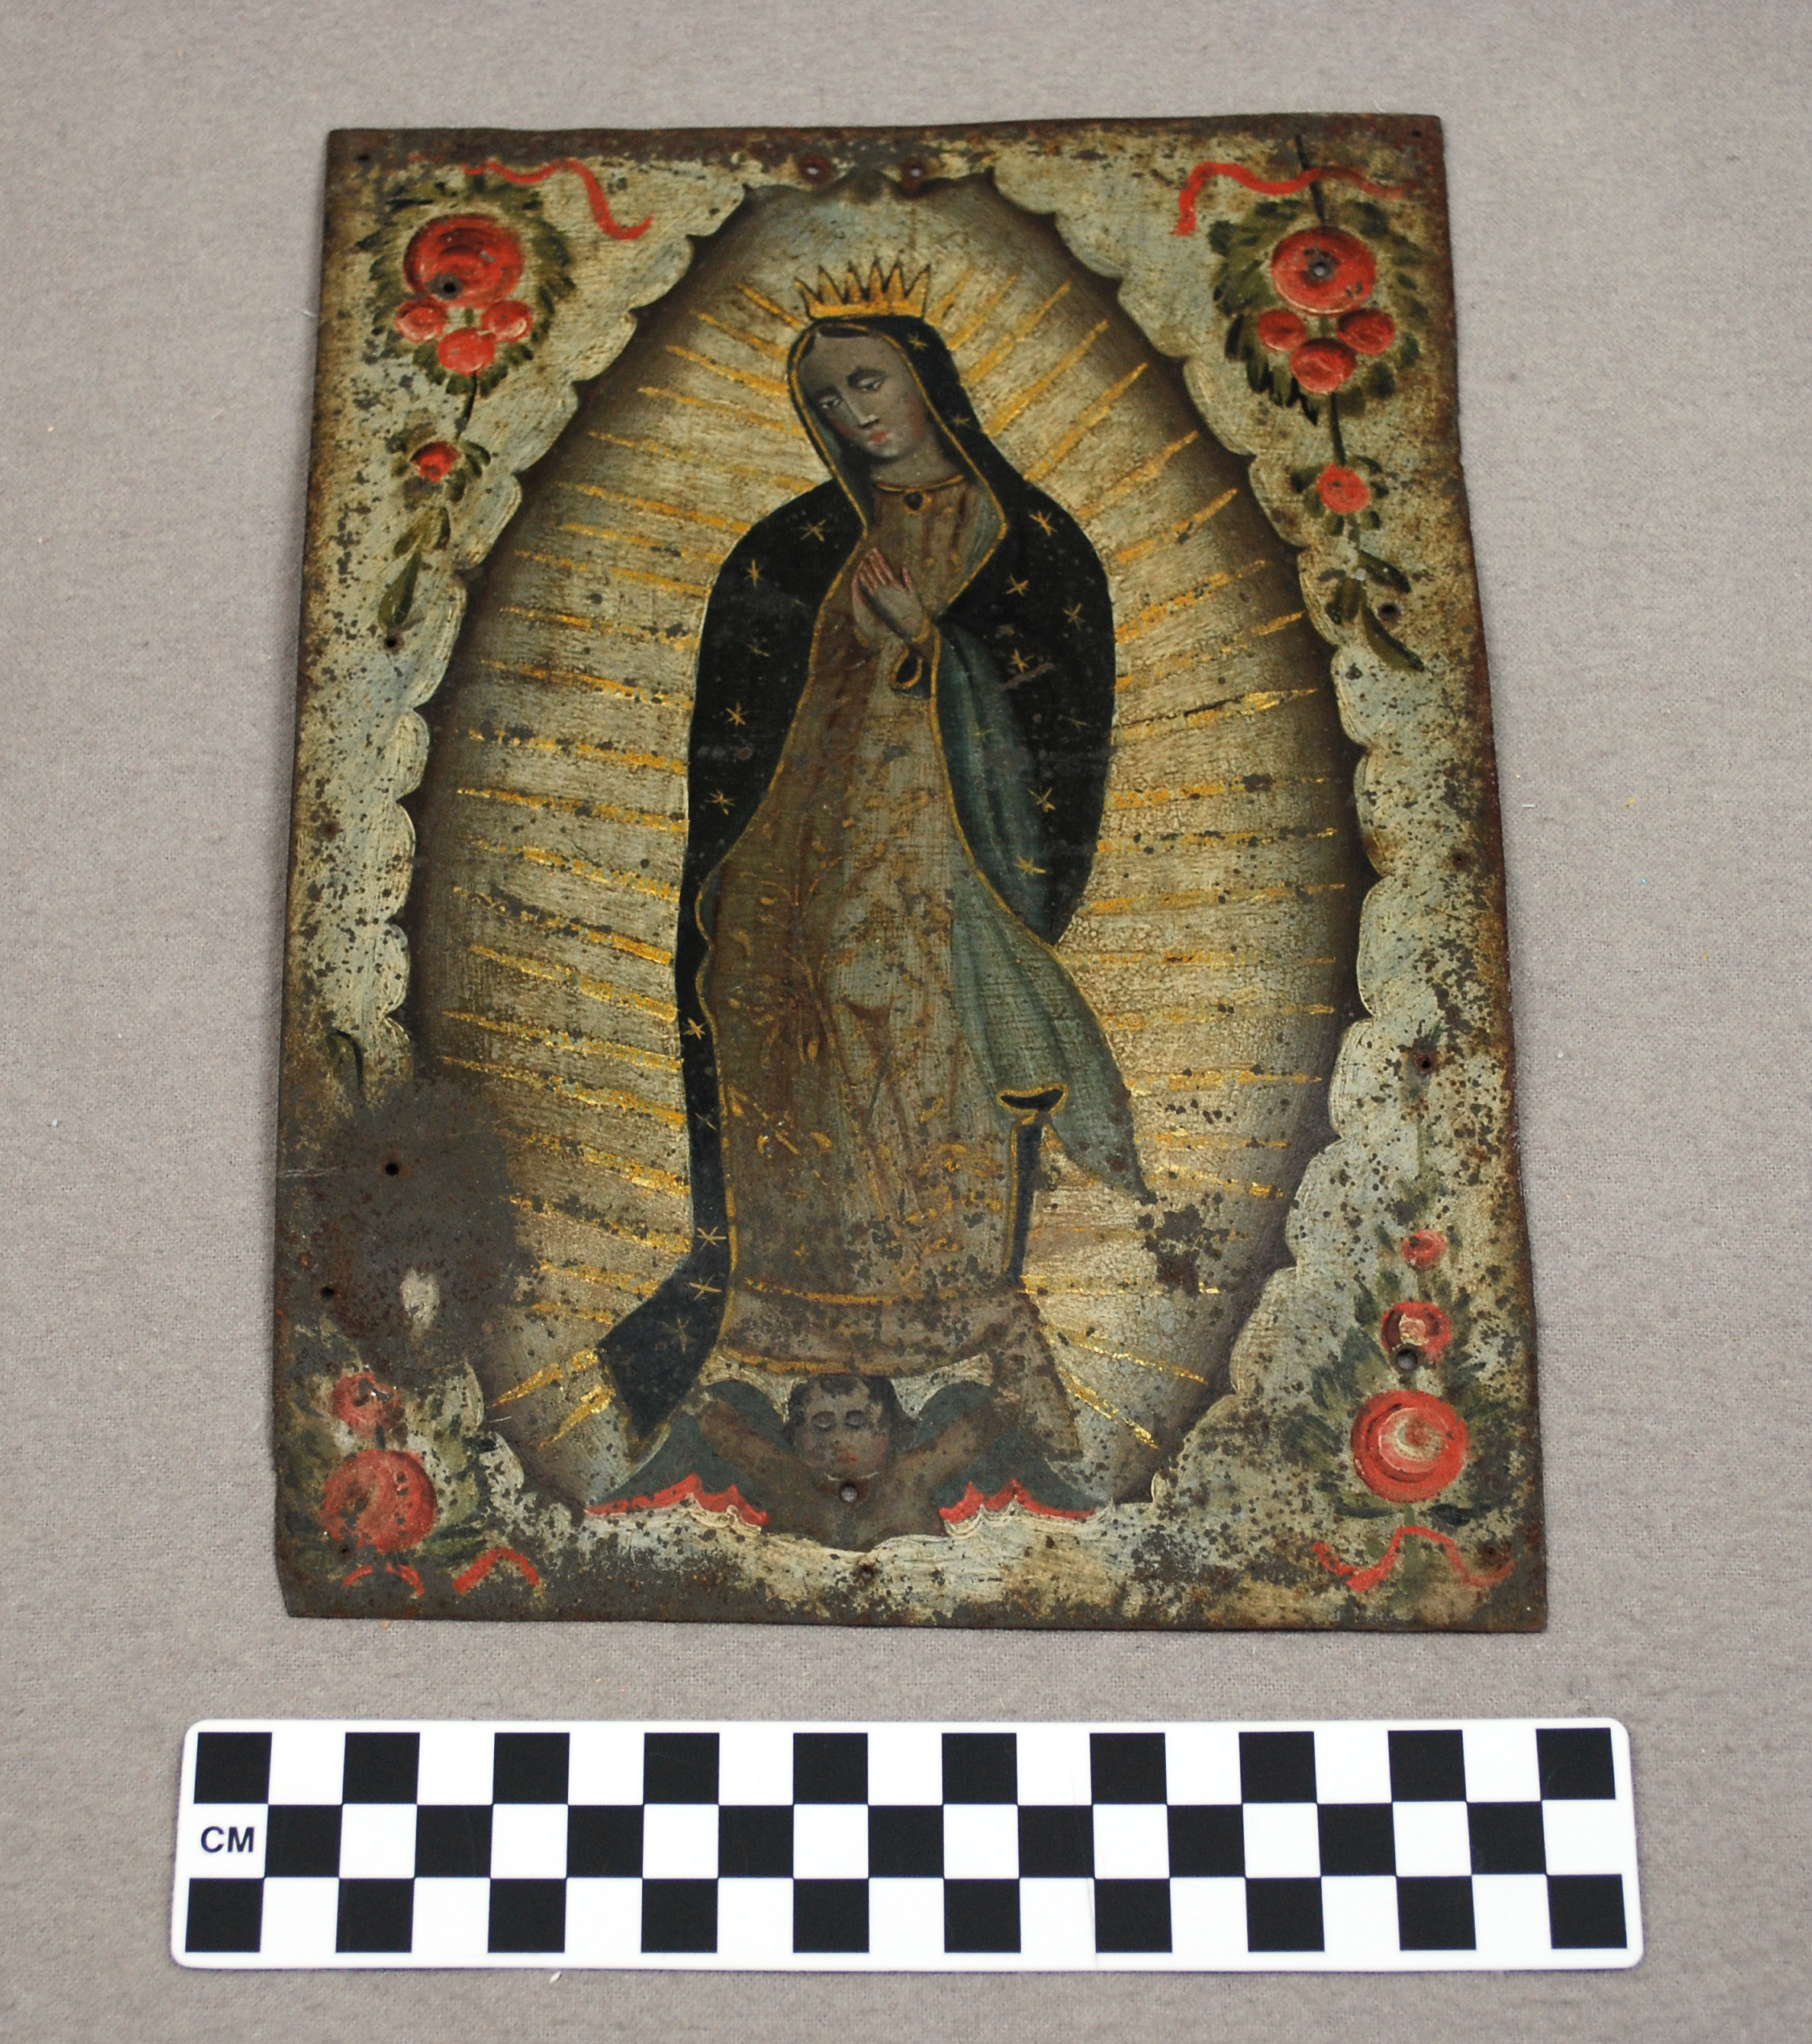 Object: Retablo (The Virgin of Guadalupe)